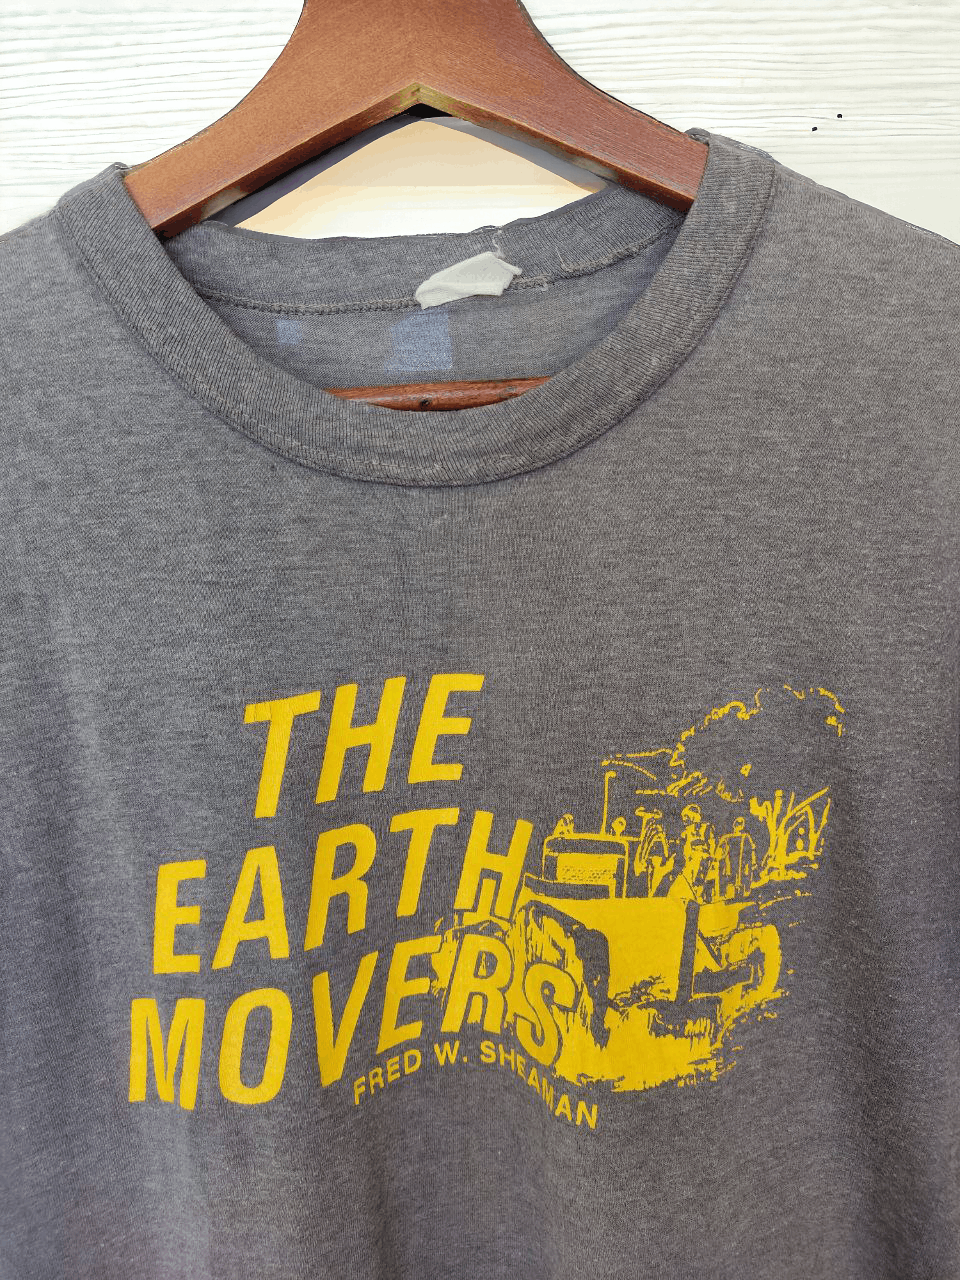 Vintage 80s The Earth Mover Fred W Shearan Tee - 4